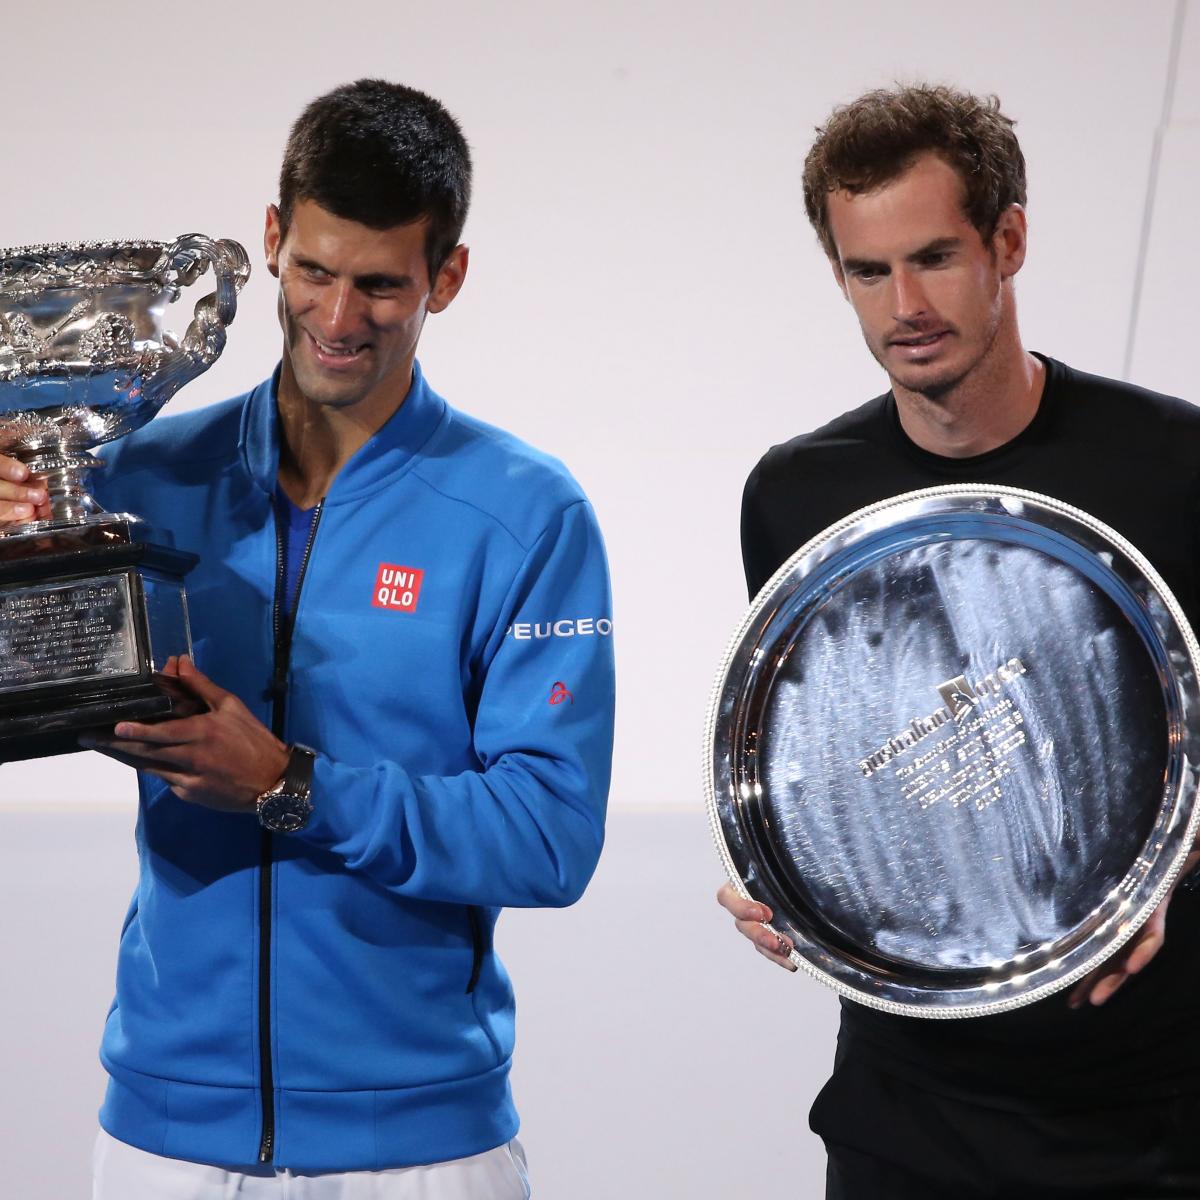 Australian Open 2015: Results, Reaction and More from Djokovic vs. Murray Final ...